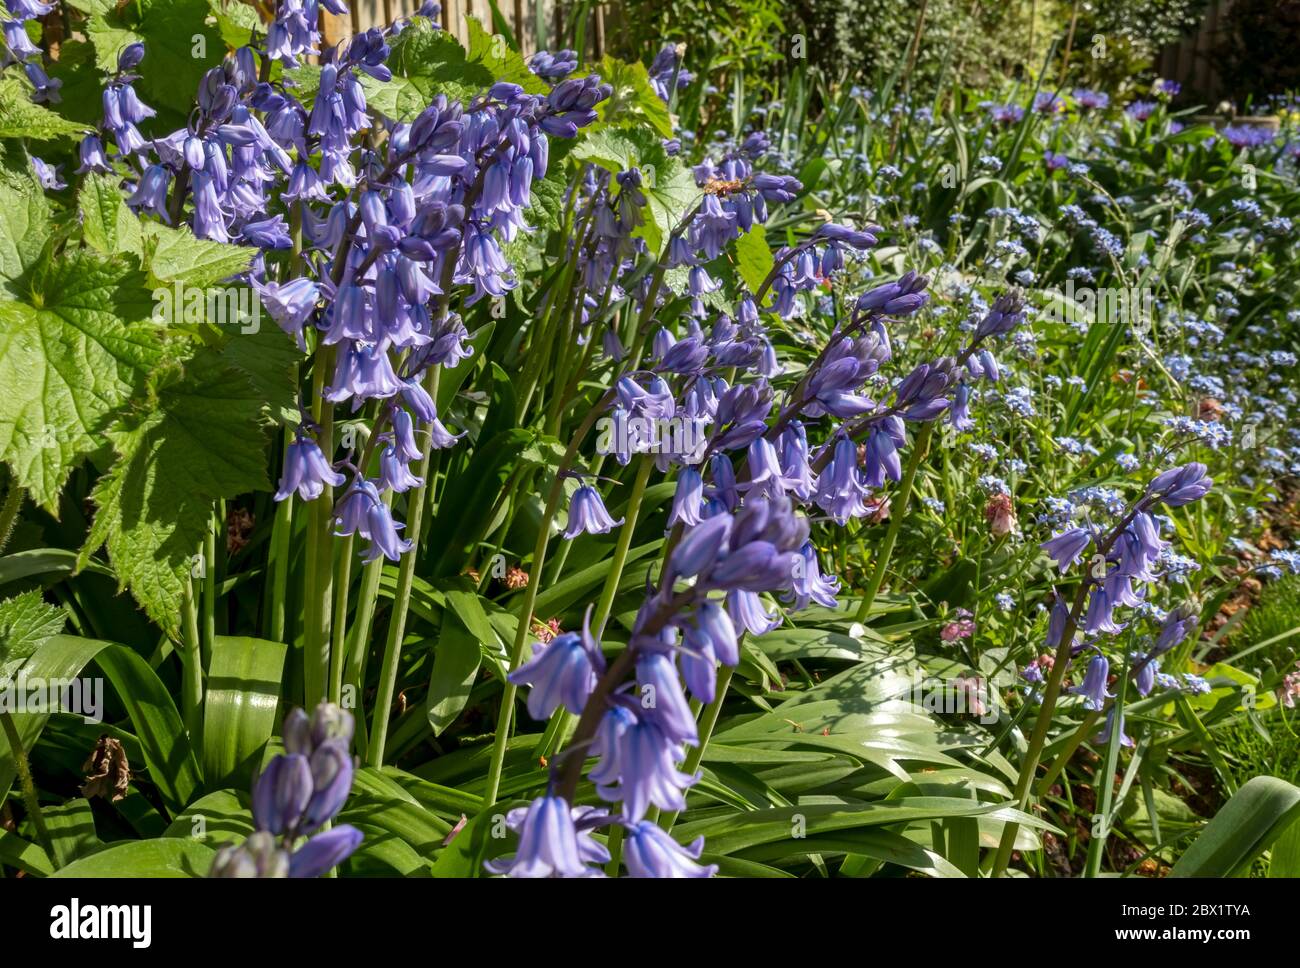 Close up of cultivated bluebell bluebells and forget me nots blue flowering flowers in spring border England UK United Kingdom GB Great Britain Stock Photo